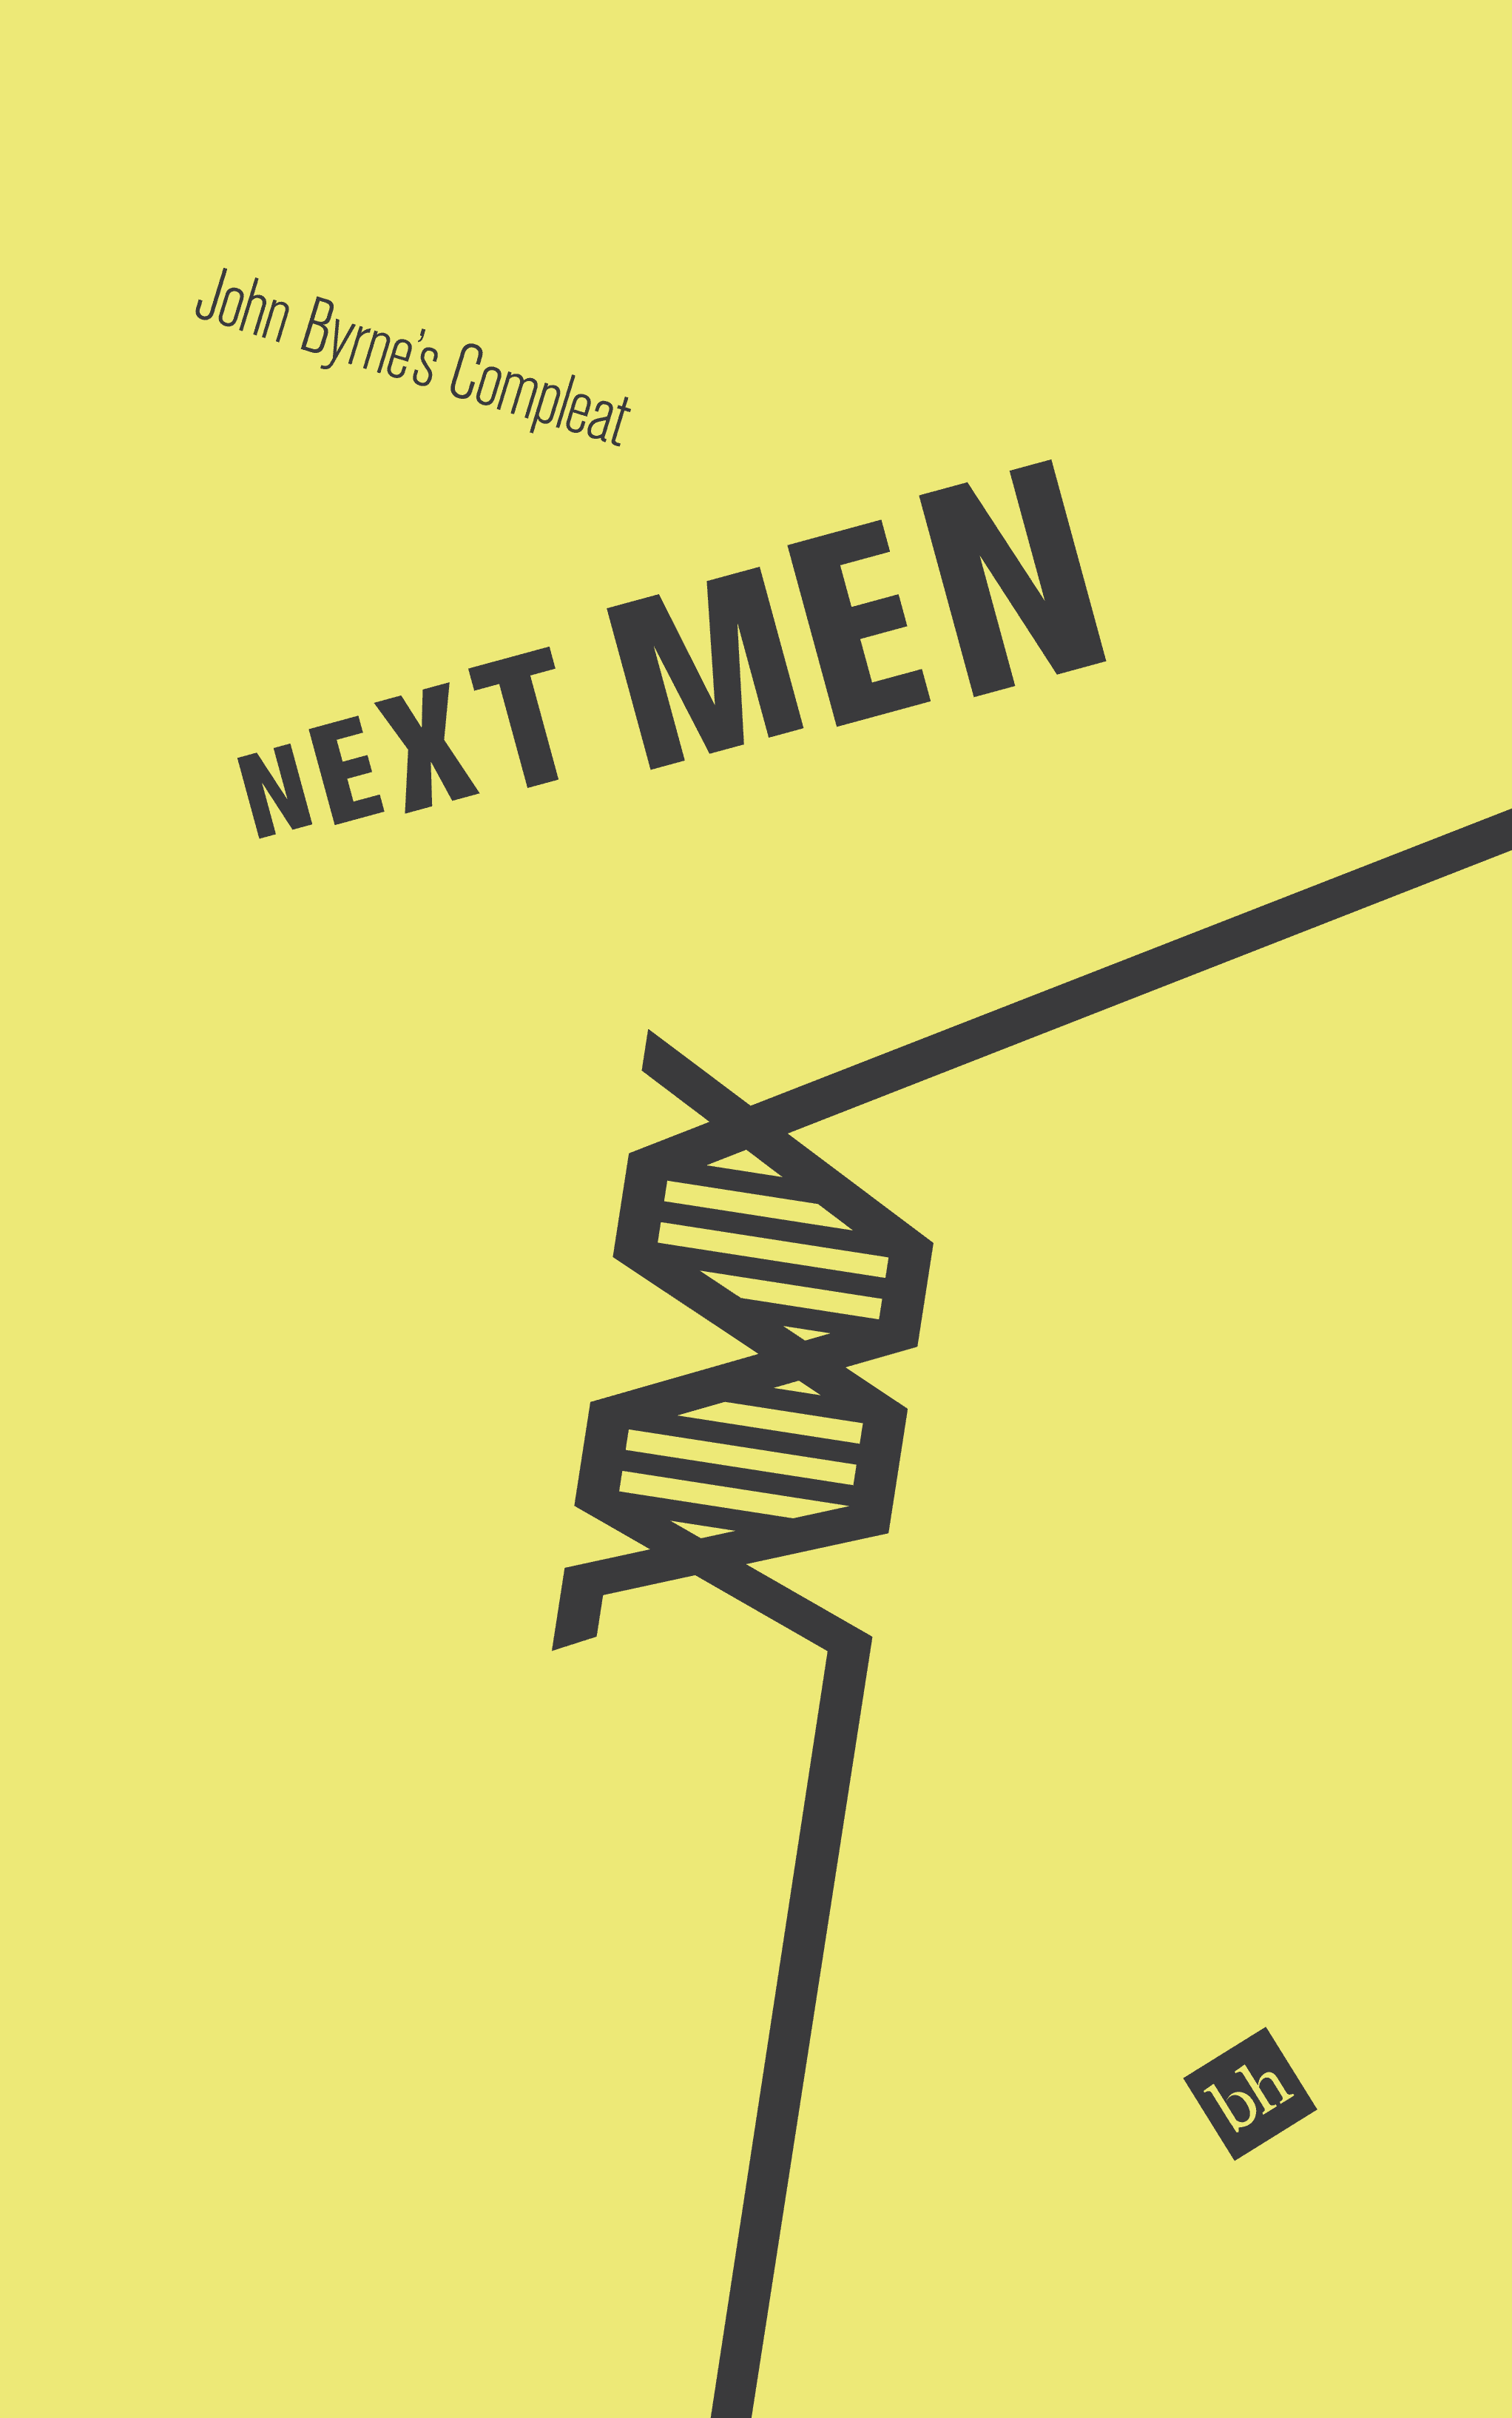 Book cover mock thumbnail for Compleat Next Men